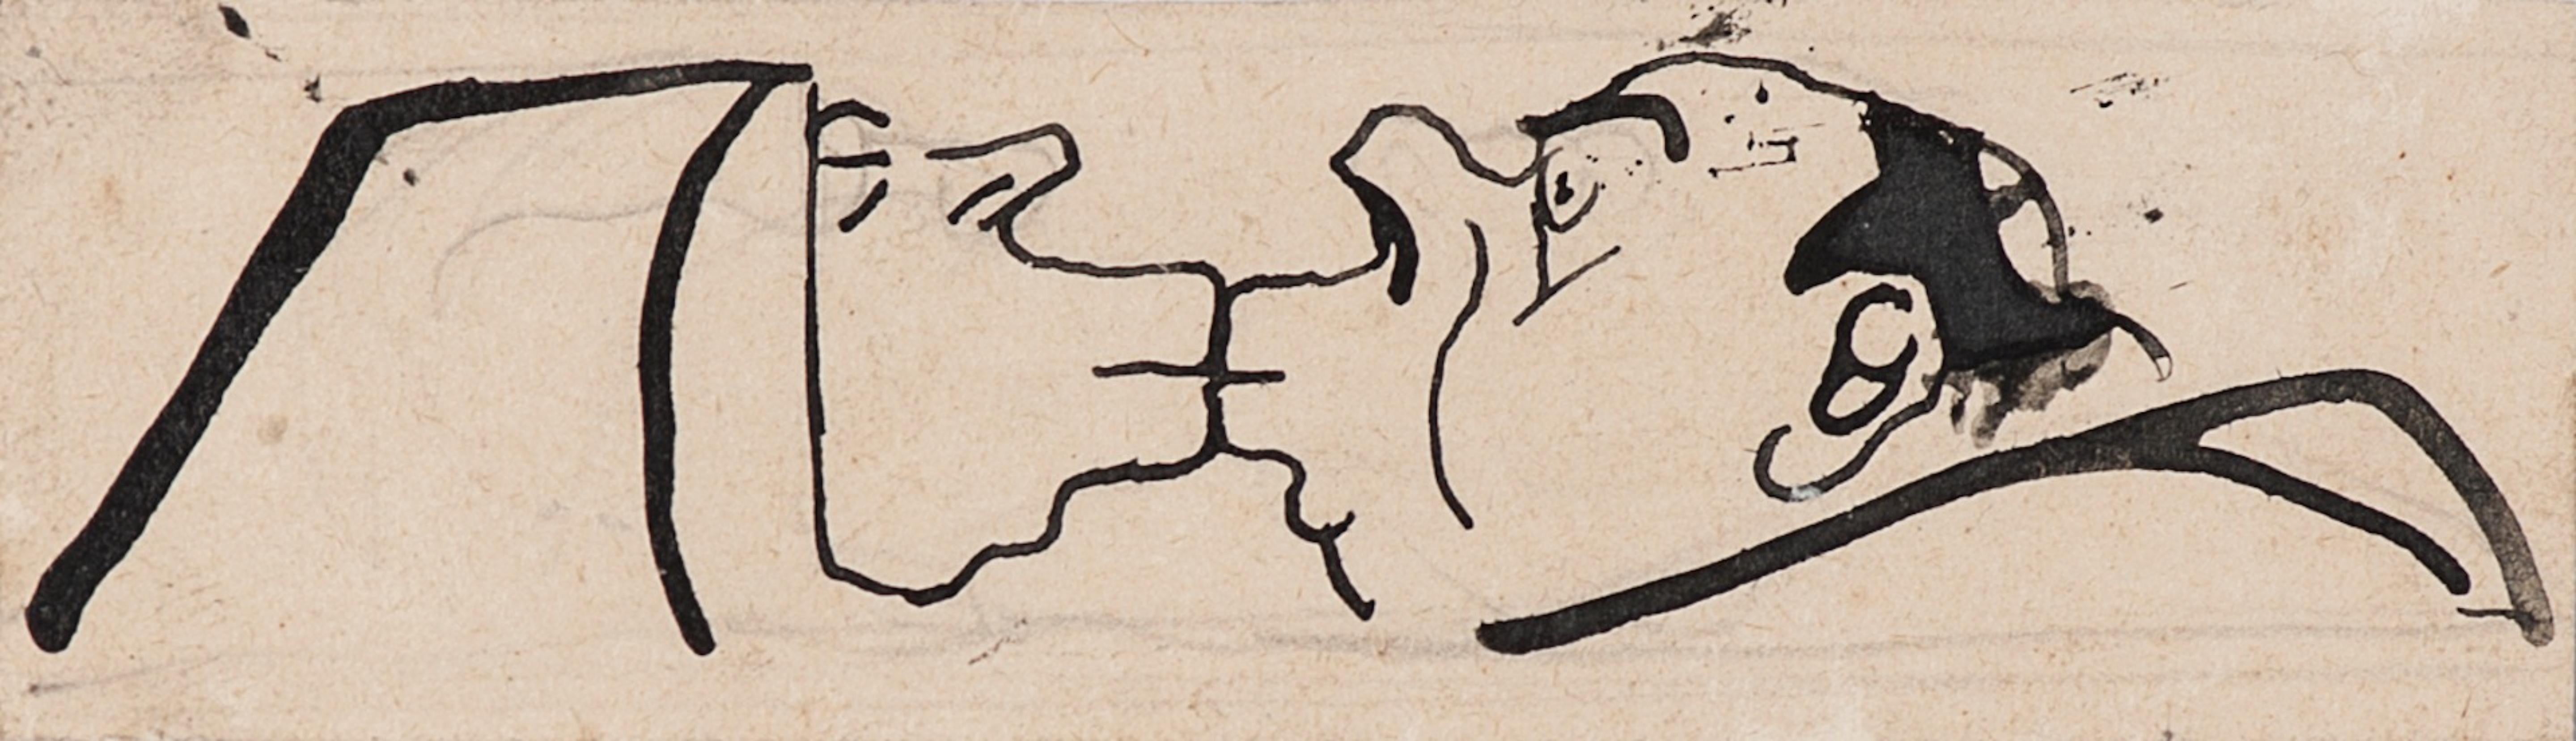 The kiss is an original China ink drawing on paper by Gabriele Galantara (1865-1937).

In very good conditions conditions.

Sheet dimension: 3 x 10.3 cm.

This is an original drawing representing a different couple kissing each other in a satirical